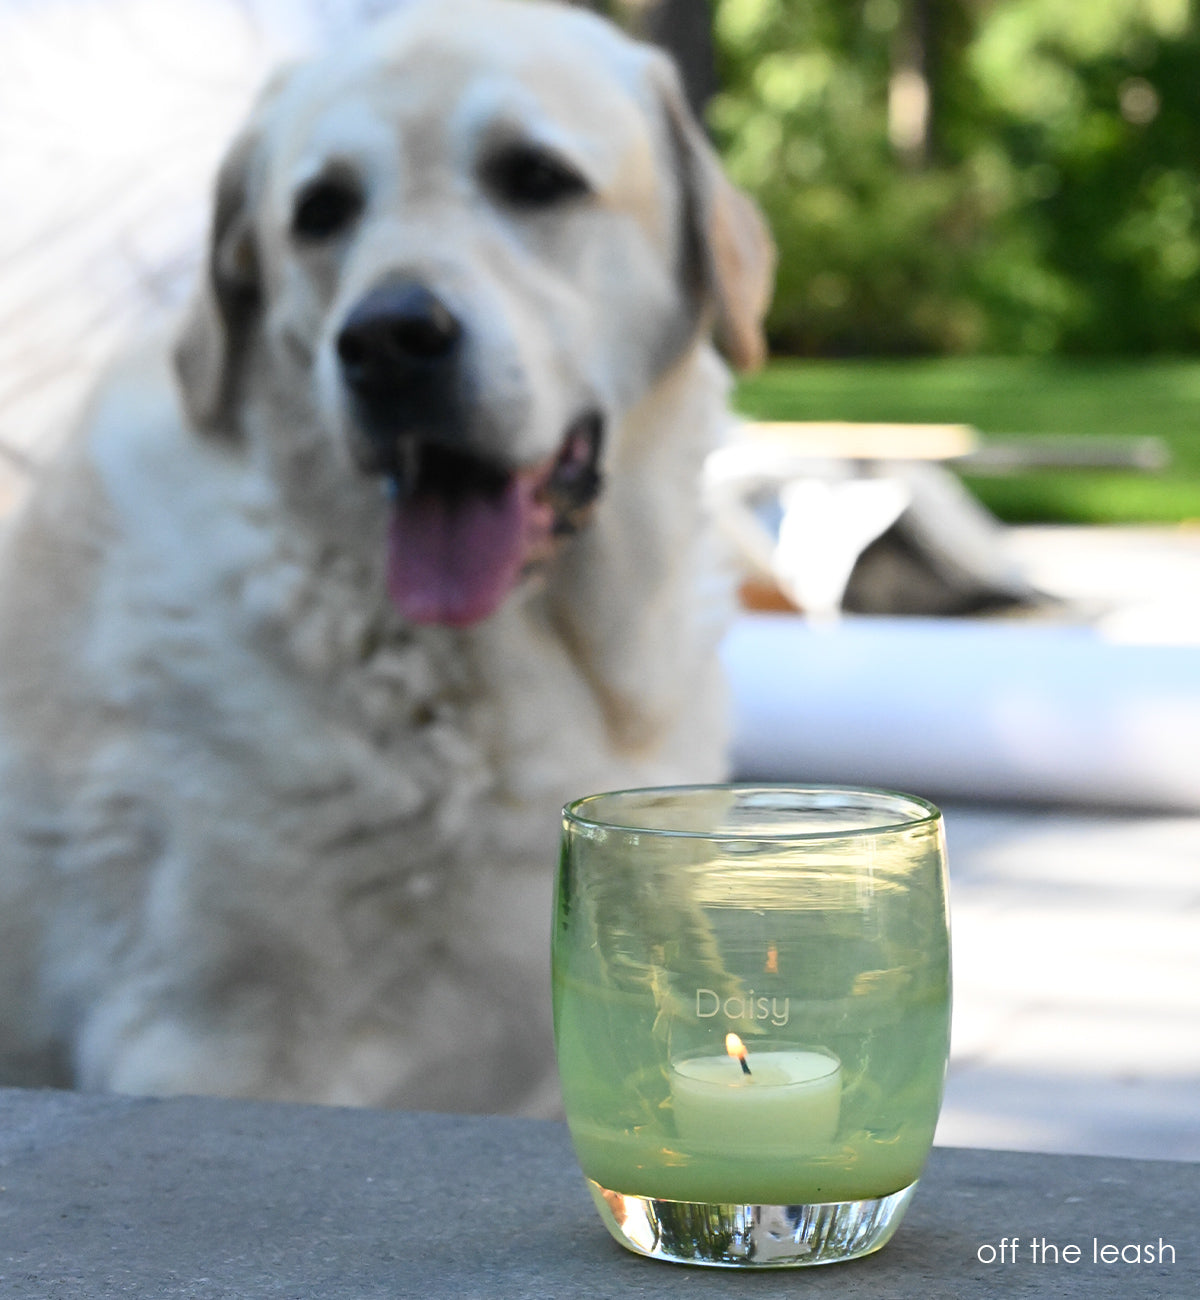 off the leash is a moss green hand-blown glass votive candle holder. transparent towards the top. etched with "daisy"